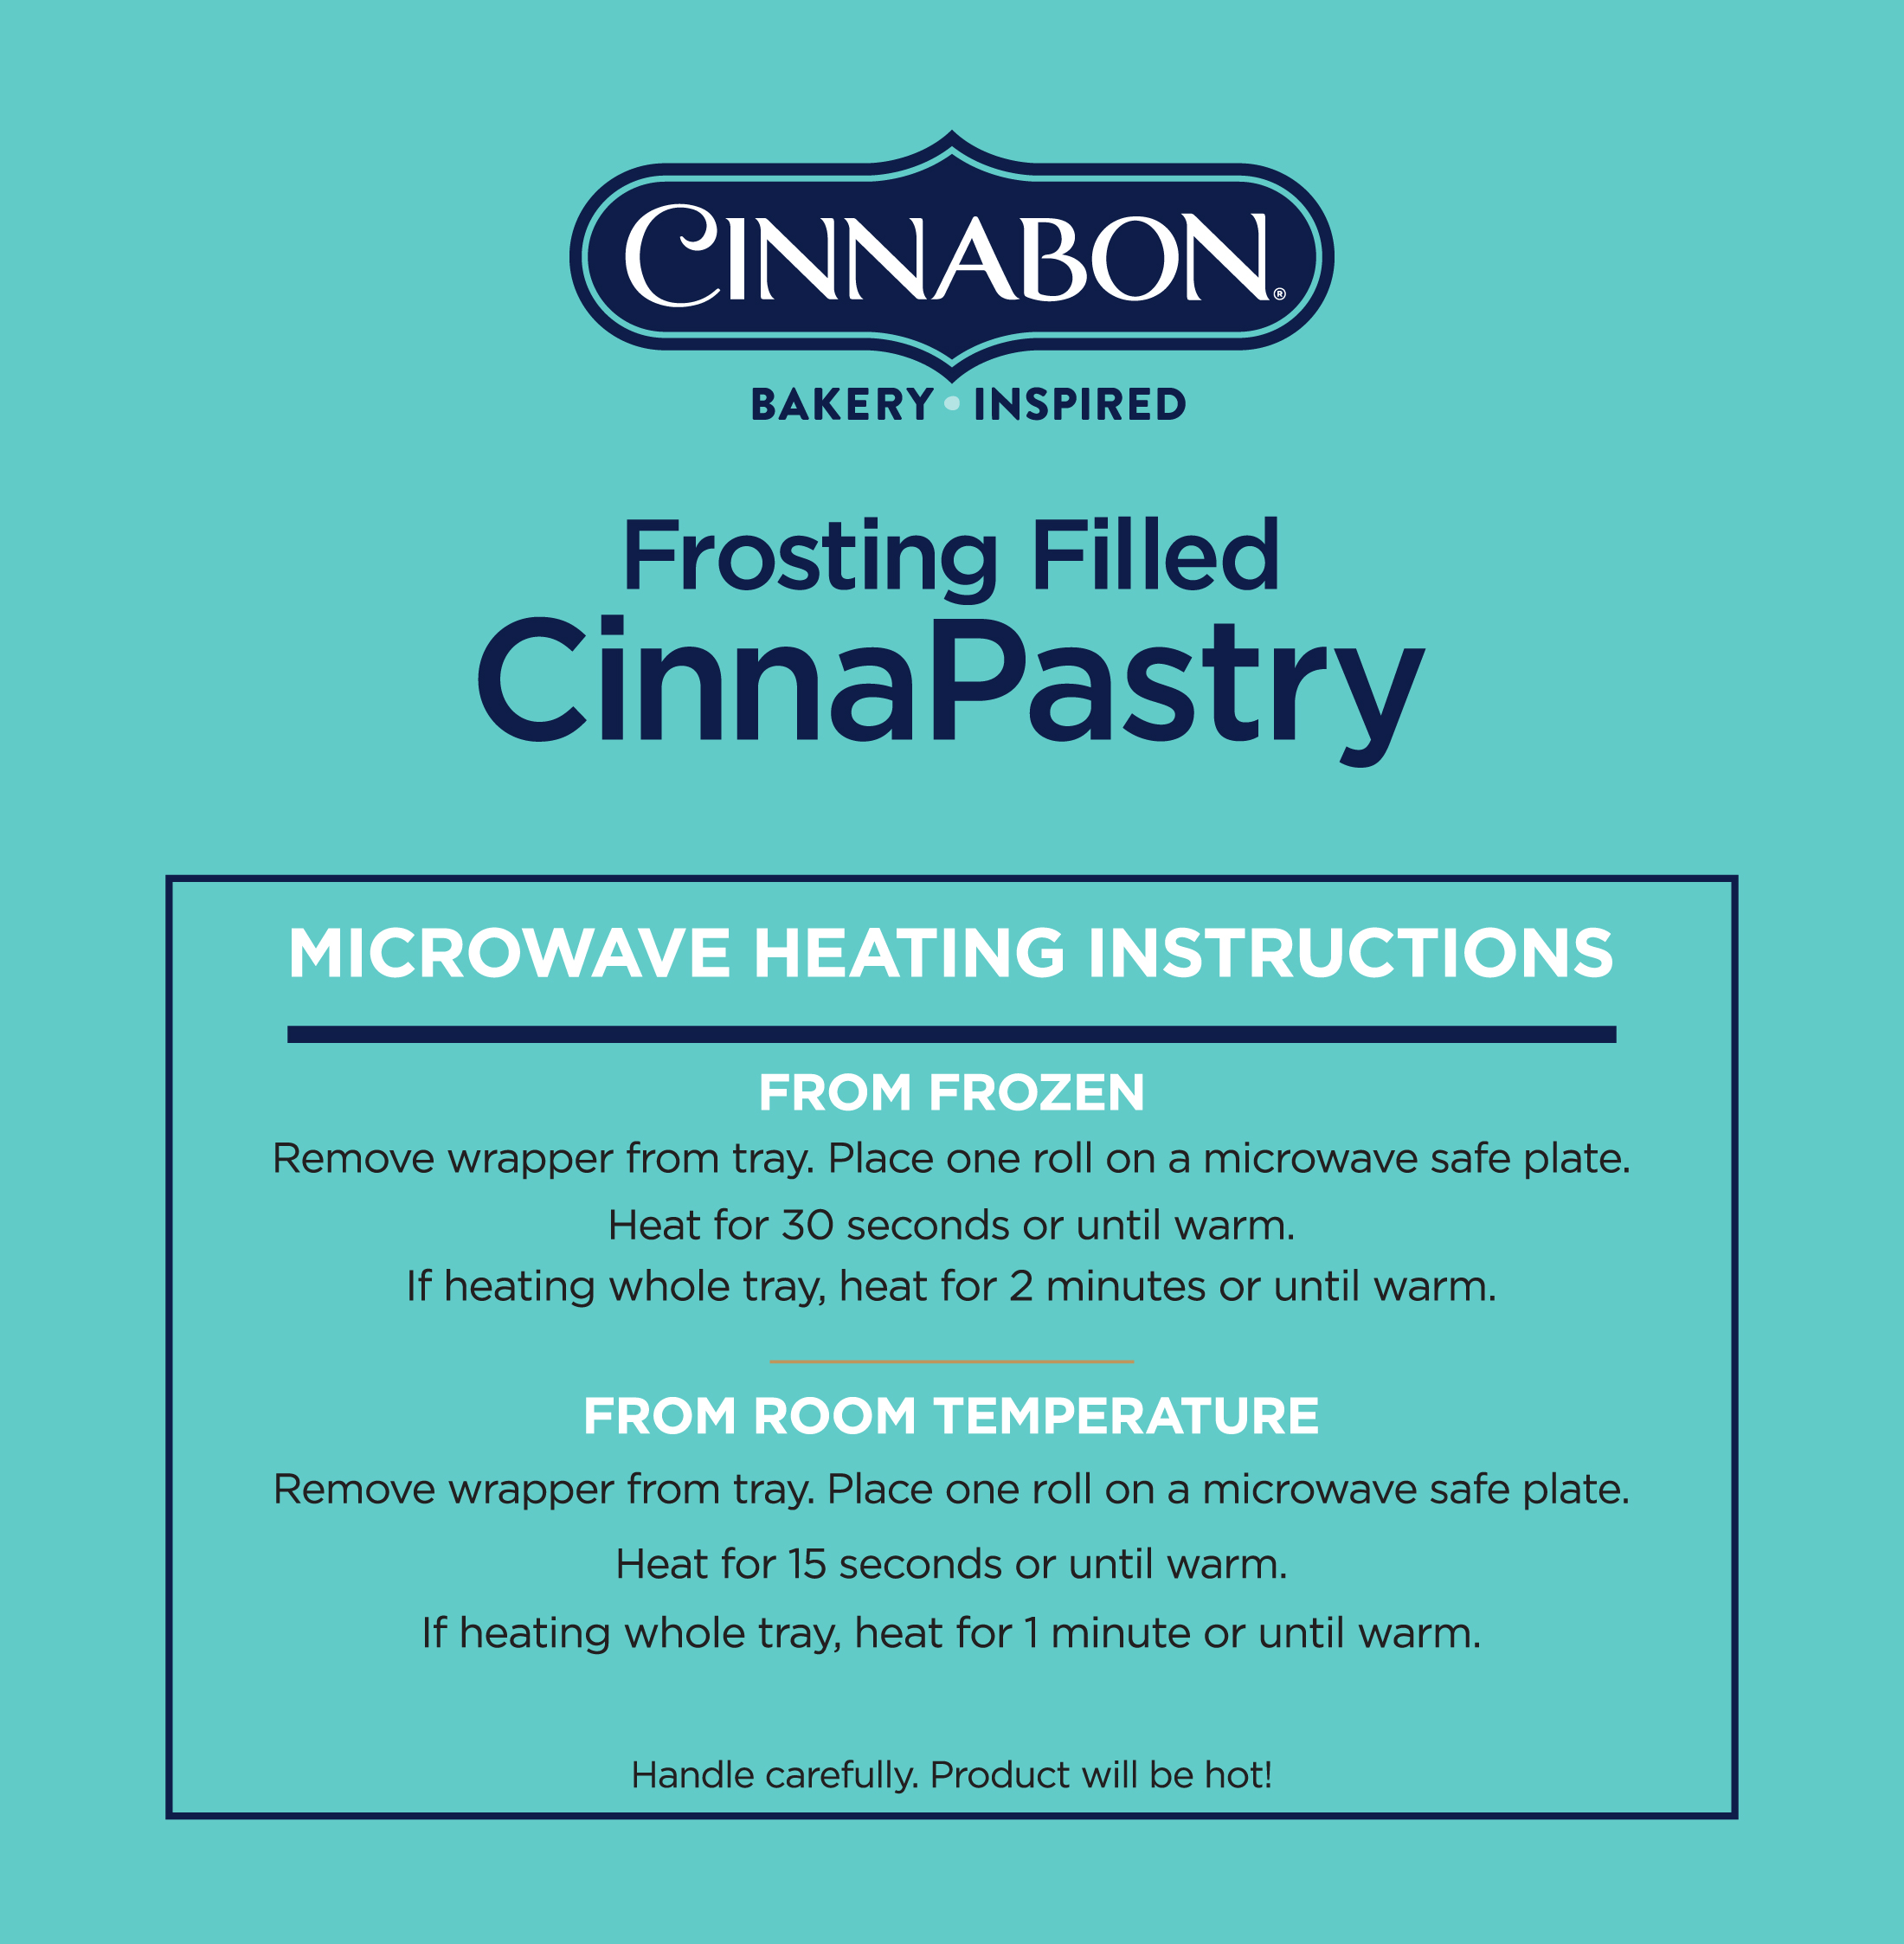 Cinnabon Frosting Filled Cinnapastry, 14.9oz, 4 Pastries - image 4 of 4